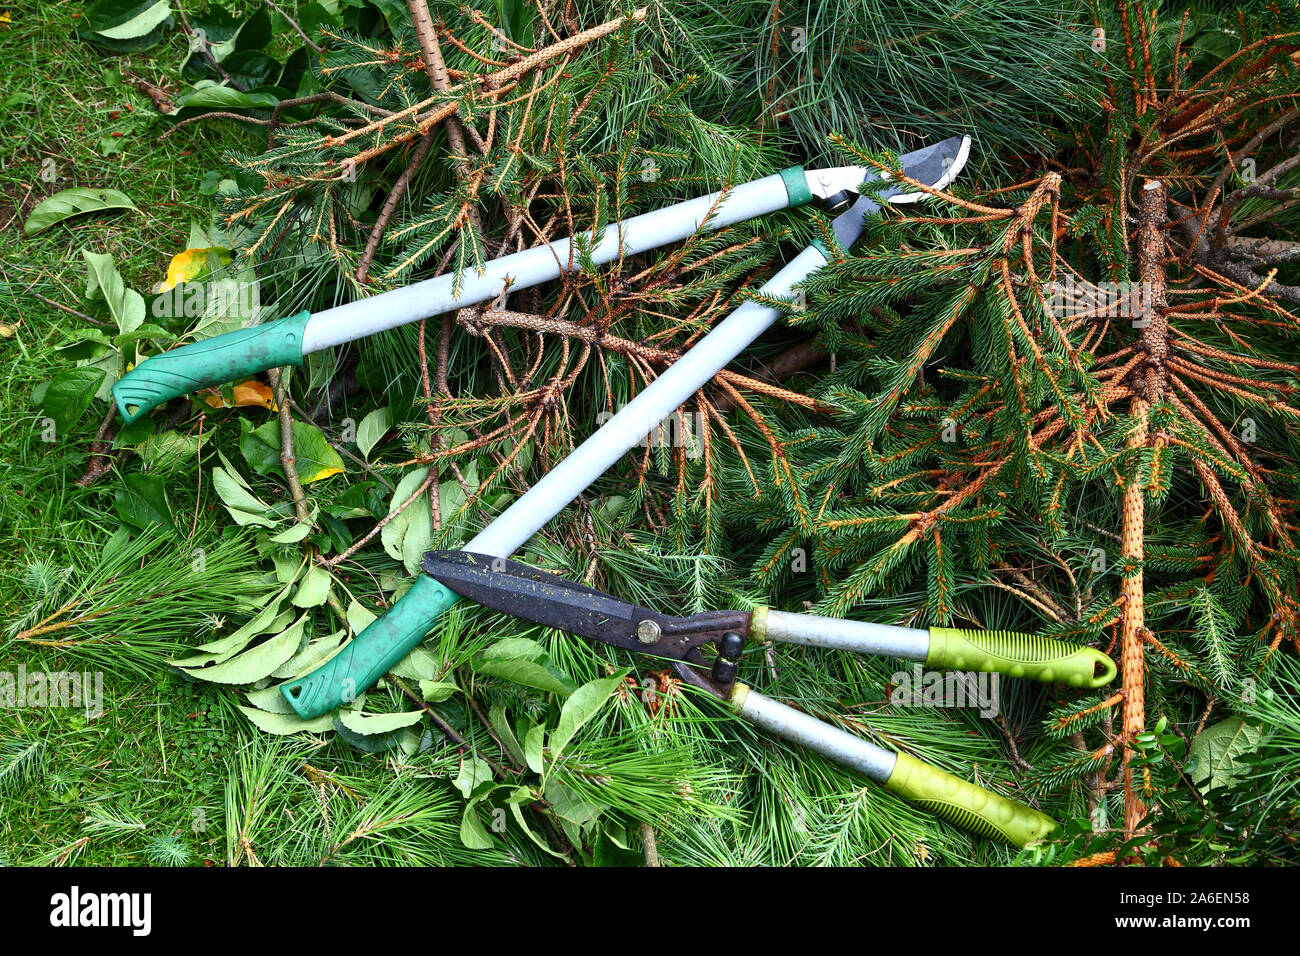 Garden loppers and shears on a heap of fir tree branches Stock Photo